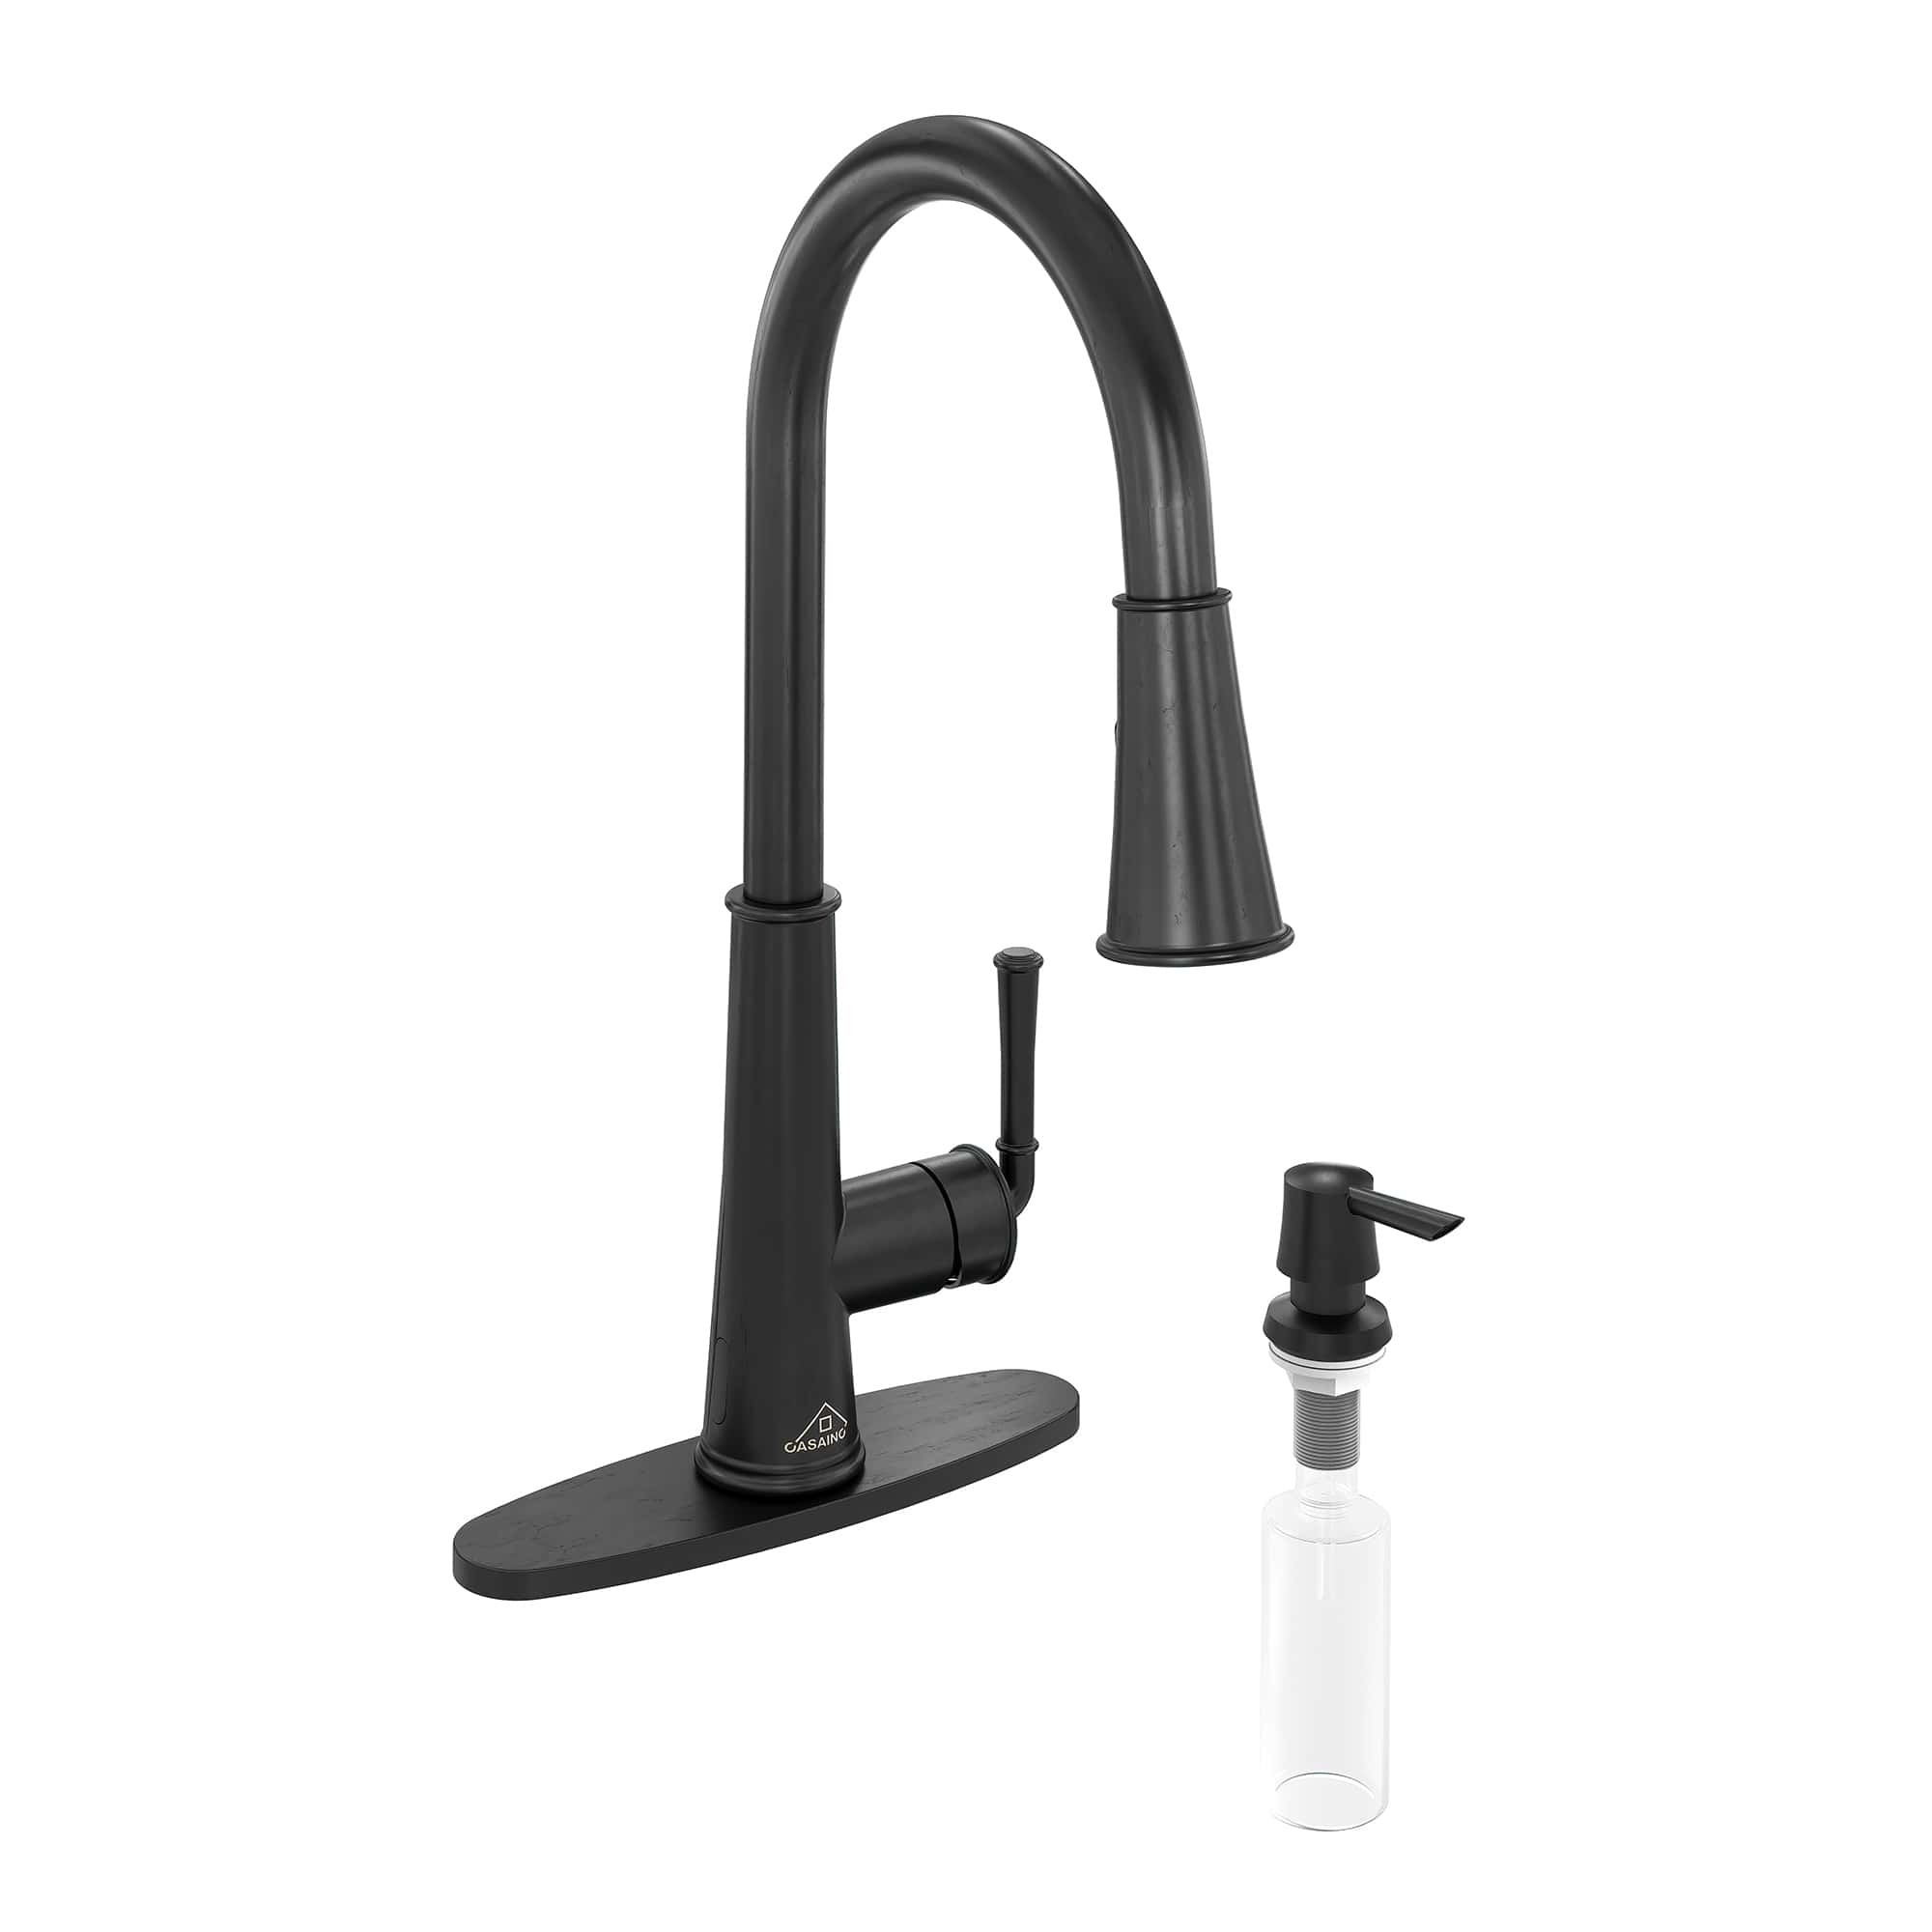 CASAINC 1.8GPM Infrared Induction Kitchen Faucet With LED Function in Matte White and More-Casainc Canada